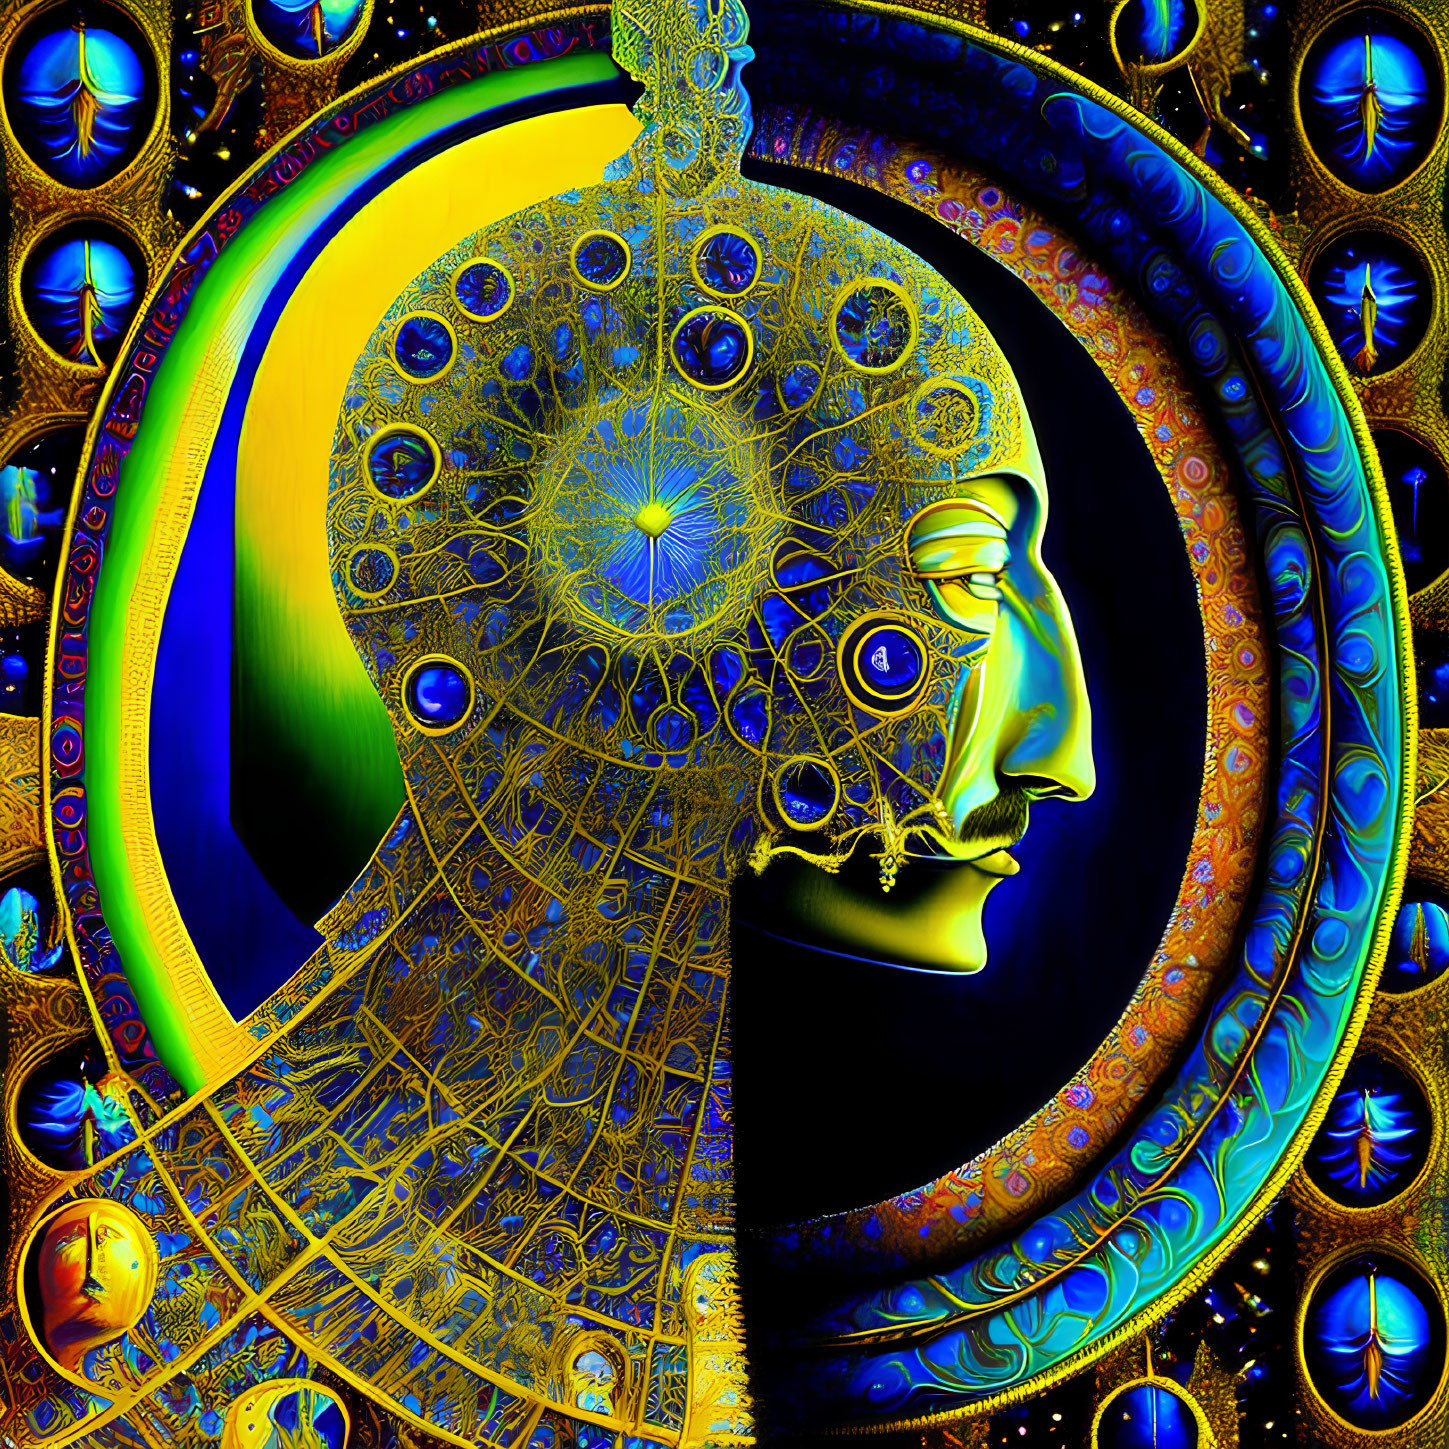 Detailed Colorful Fractal Image Featuring Human Face Profile and Cosmic Motifs